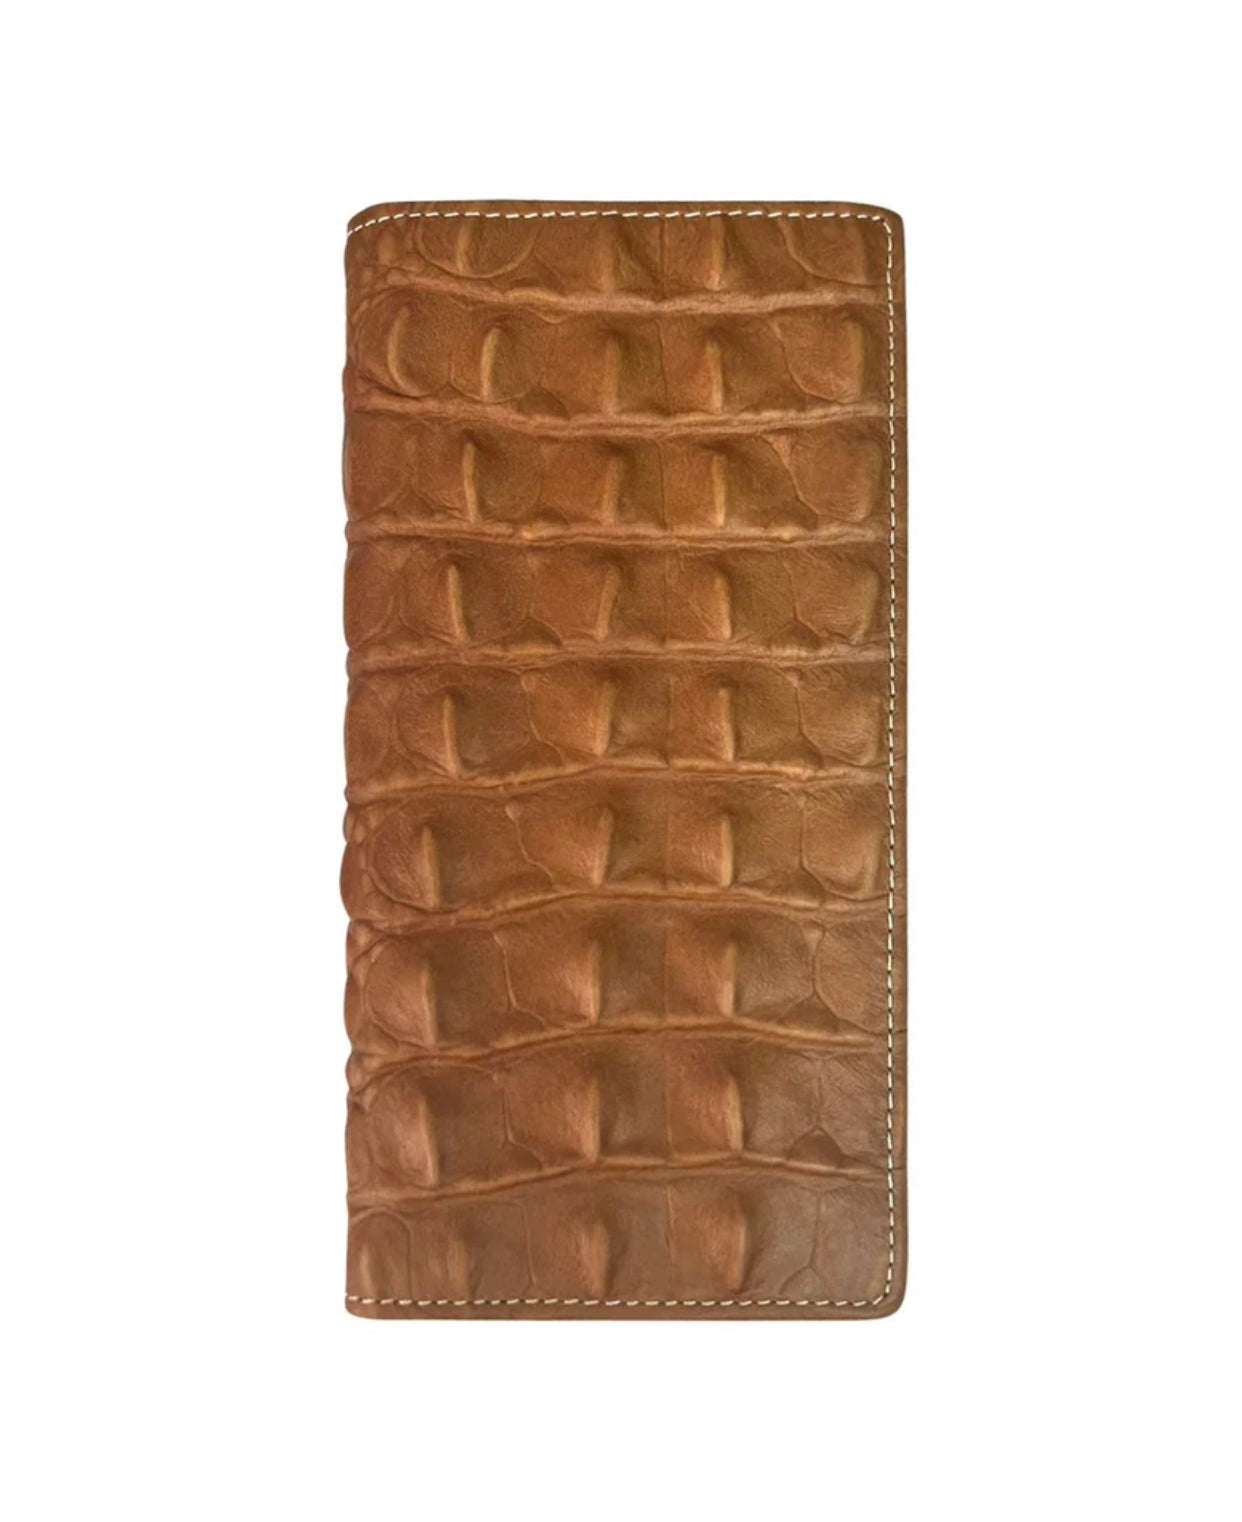 MWLW035 - Genuine Leather Collection Men's Wallet